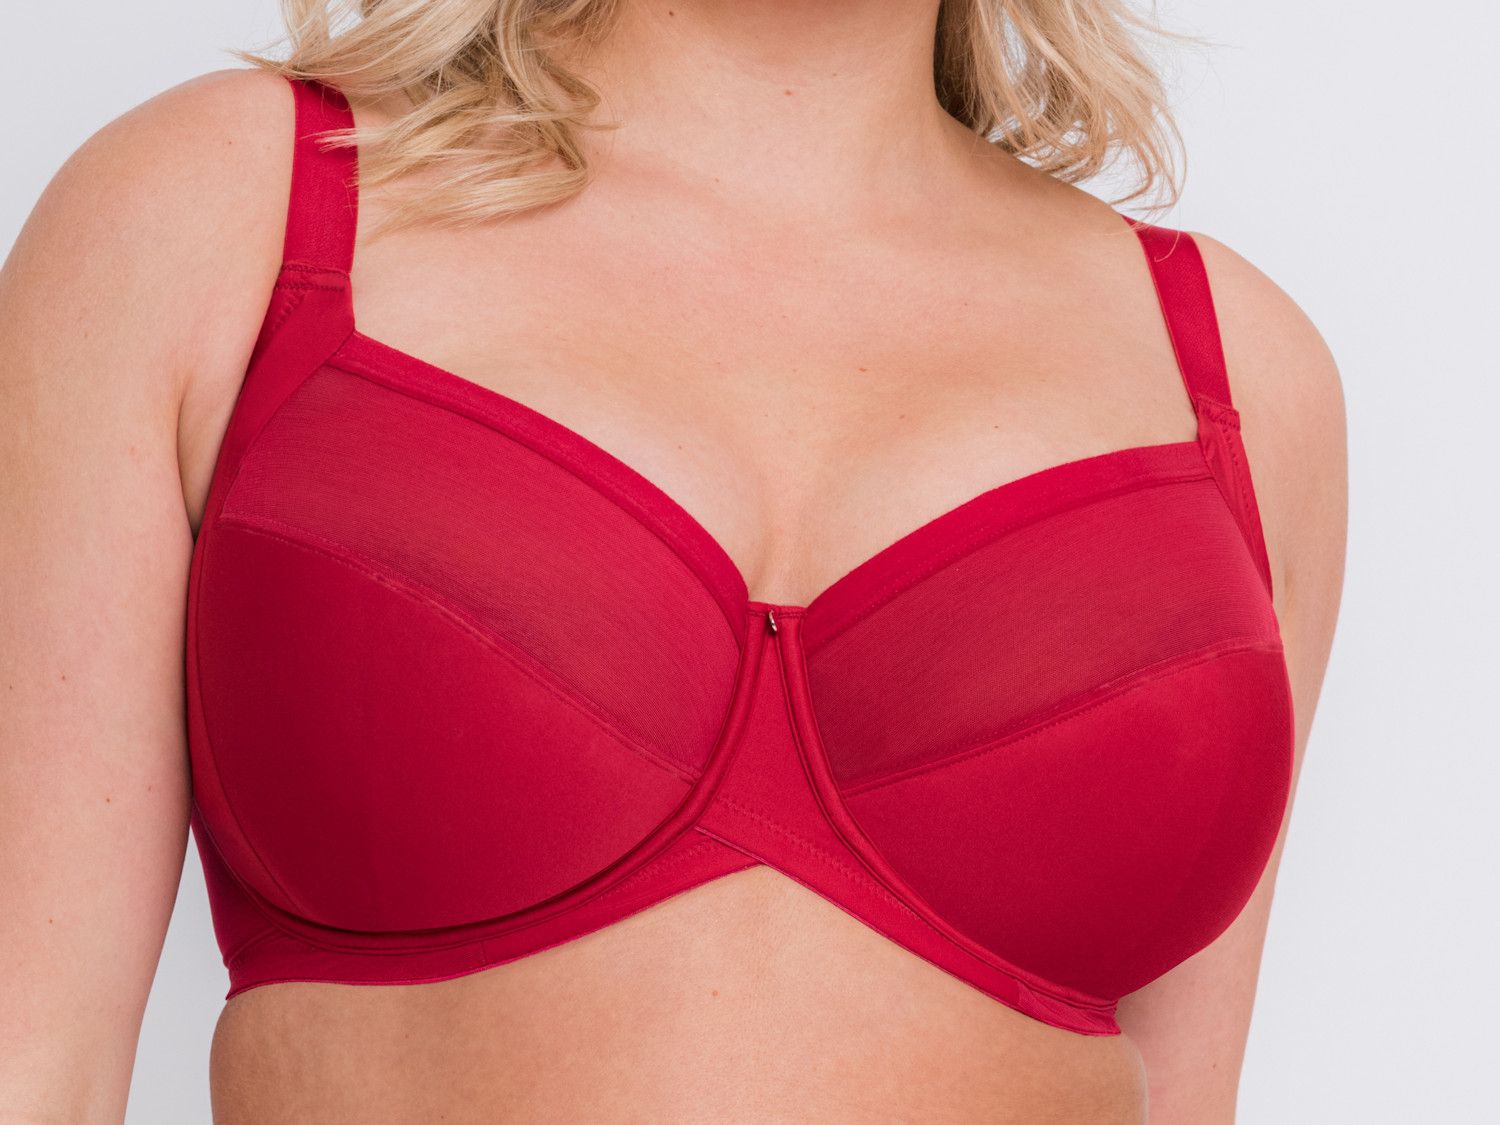 Rubies Custom Bras: Normalizing Asymmetrical Uneven Breasts. Bespoke Bras  Made For Different Cup Sizes